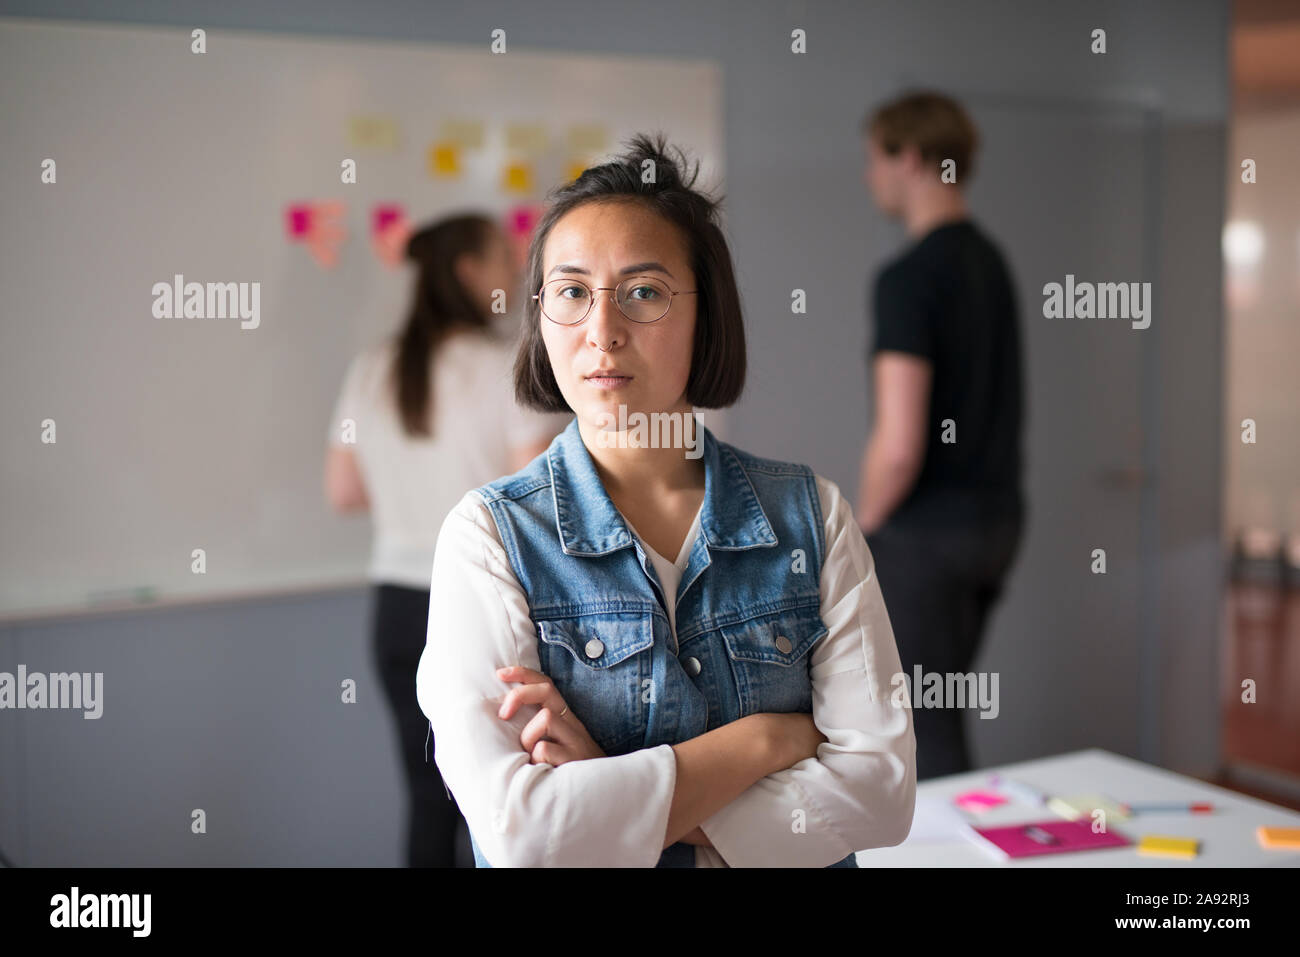 Woman at business meeting Stock Photo